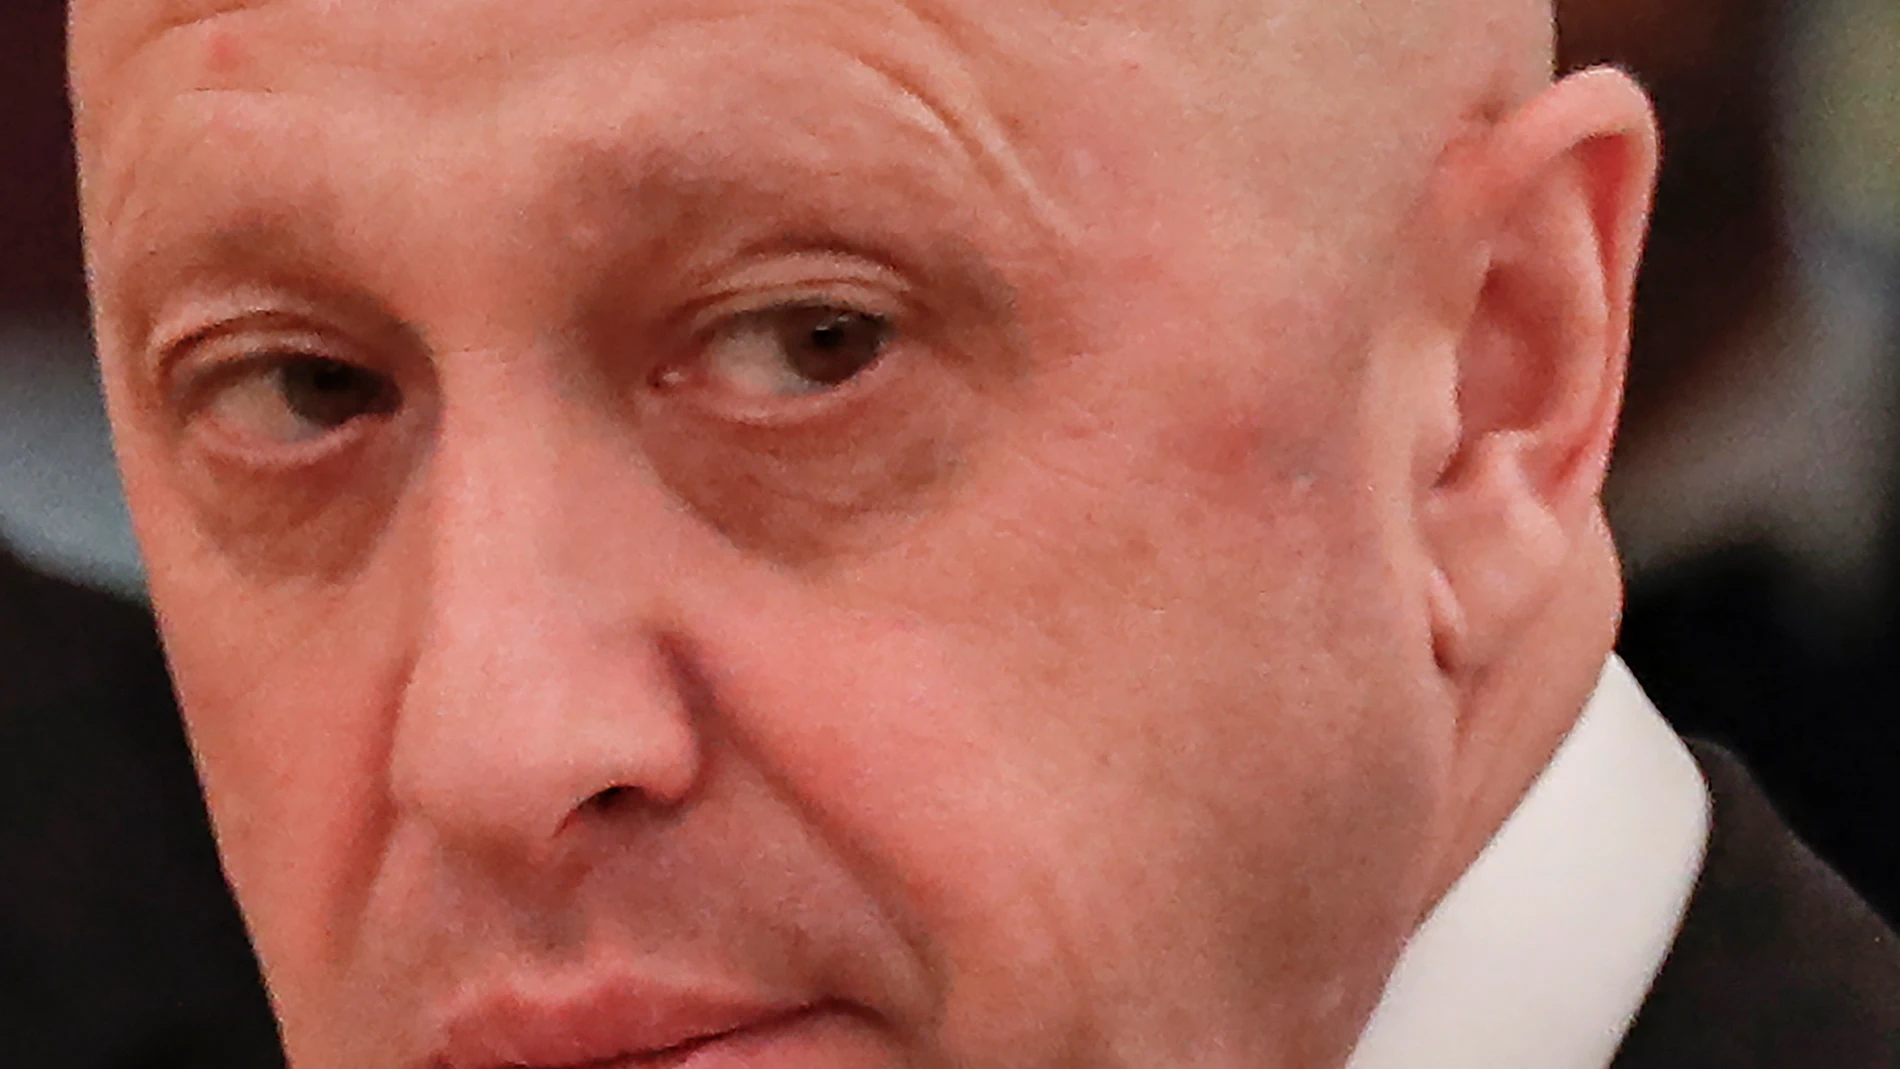 Moscow (Russian Federation), 04/07/2017.- Russian businessman Yevgeny Prigozhin prior to a meeting with business leaders at the Kremlin in Moscow, Russia, 04 July 2017 (issued 23 August 2023). An investigation was launched into the crash of an aircraft in the Tver region in Russia on 23 August 2023, the Russian Federal Air Transport Agency said in a statement. Among the passengers was Yevgeny Prigozhin, the agency reported. (Rusia, Moscú) EFE/EPA/SERGEI ILNITSKY/POOL 